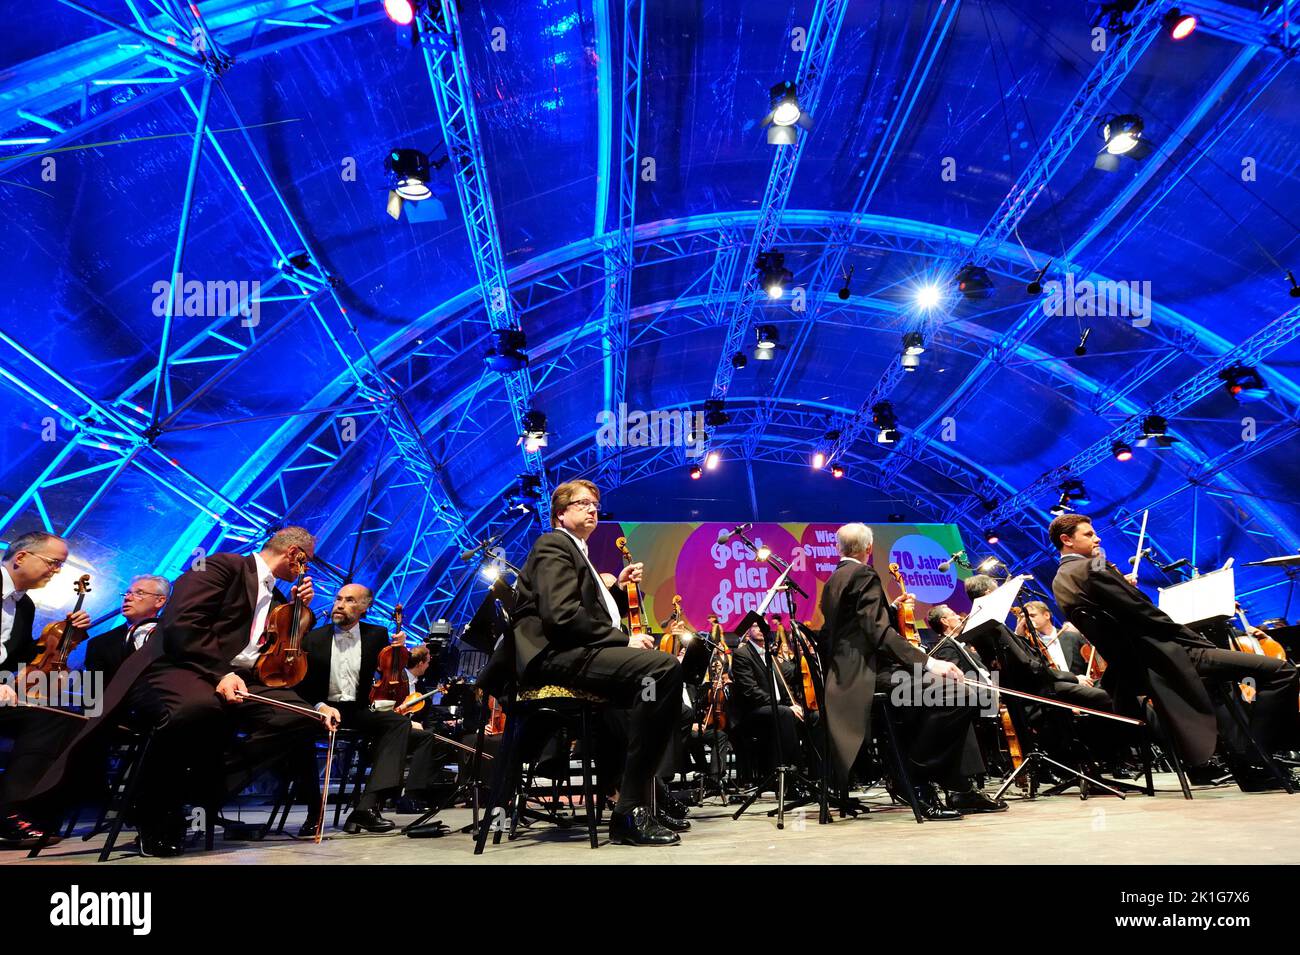 Vienna, Austria. 08 May 2015. The Vienna Symphony Orchestra at Heroes Square Stock Photo